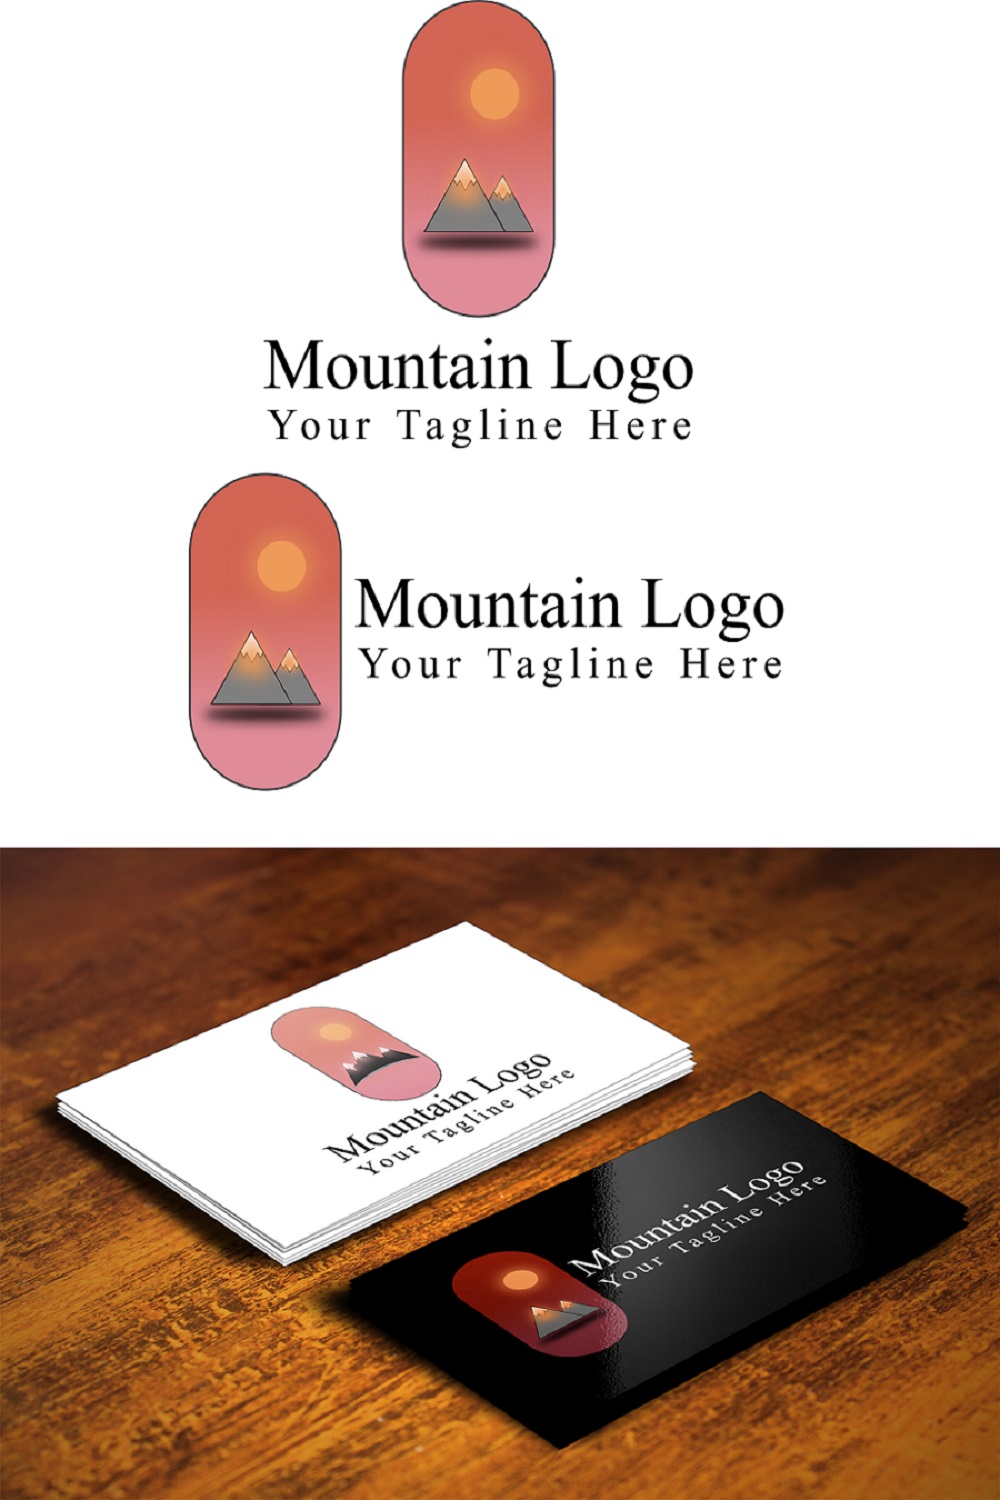 Business logos for the cards.